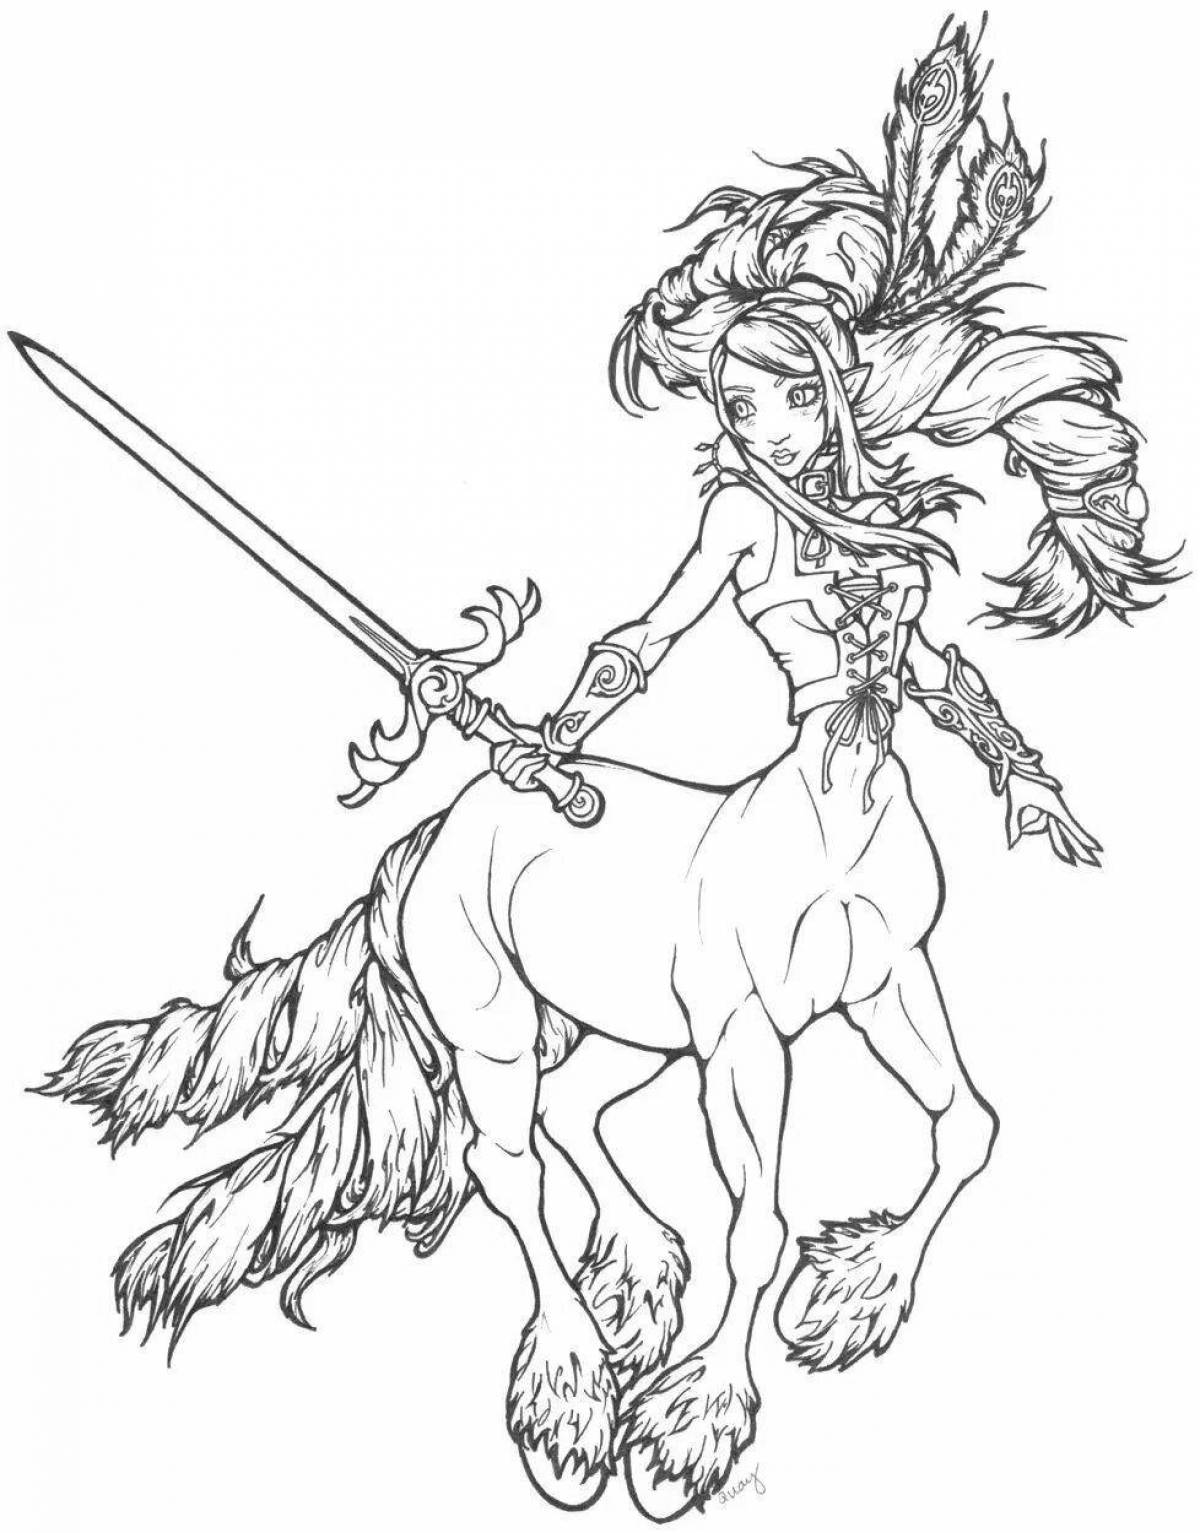 Charming mythical creature coloring book